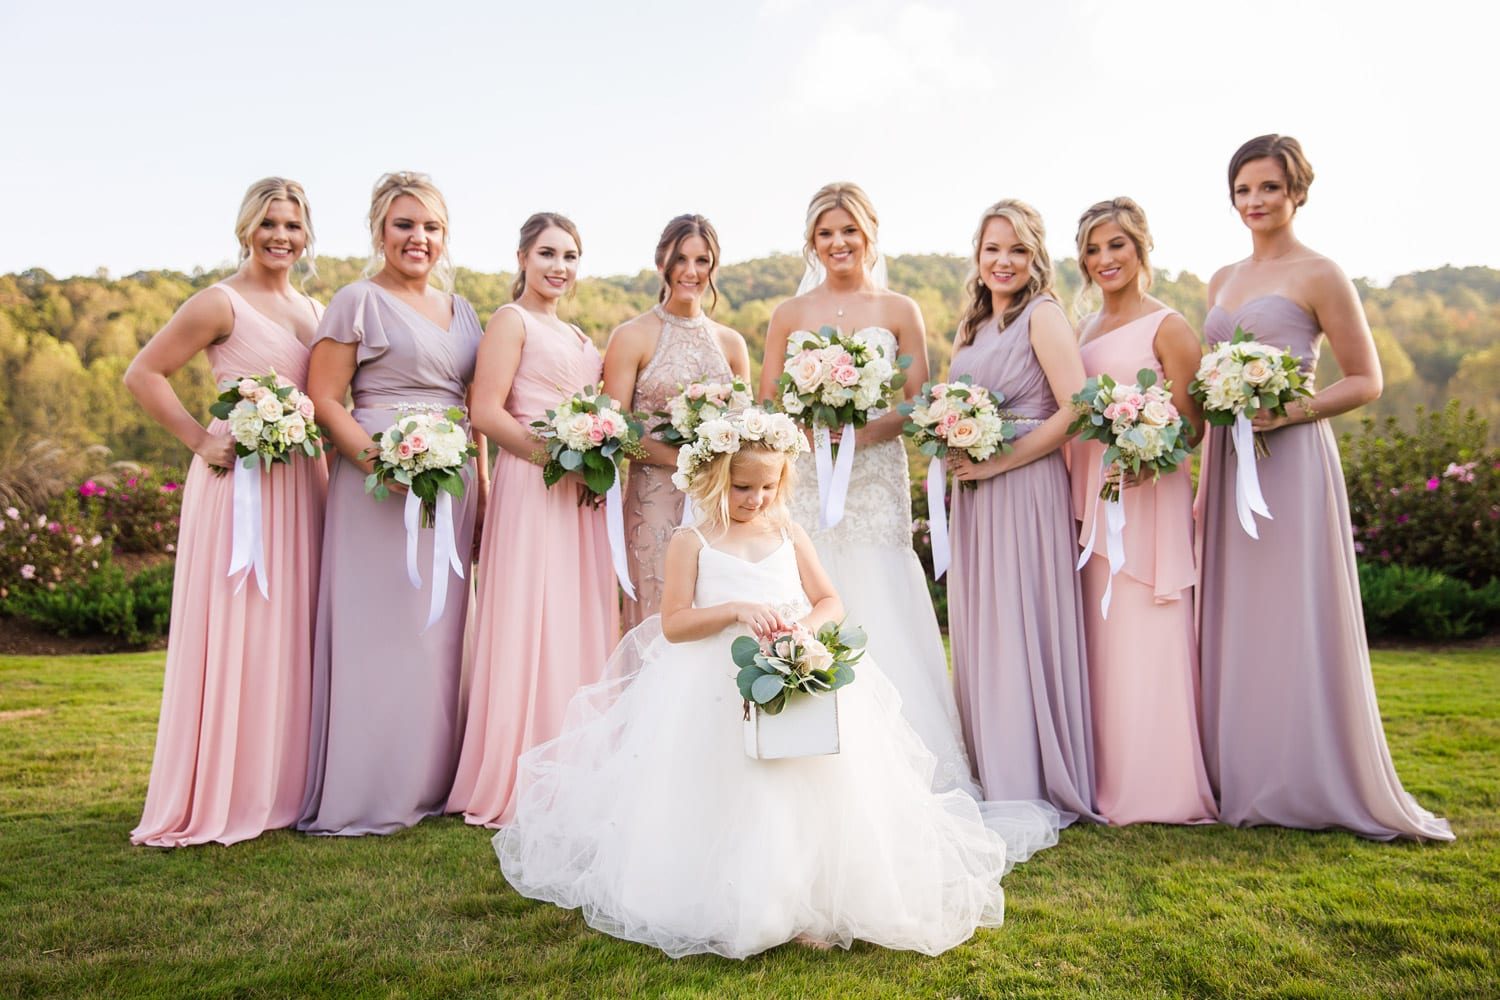 Flower girl outside with bride and bridesmaids